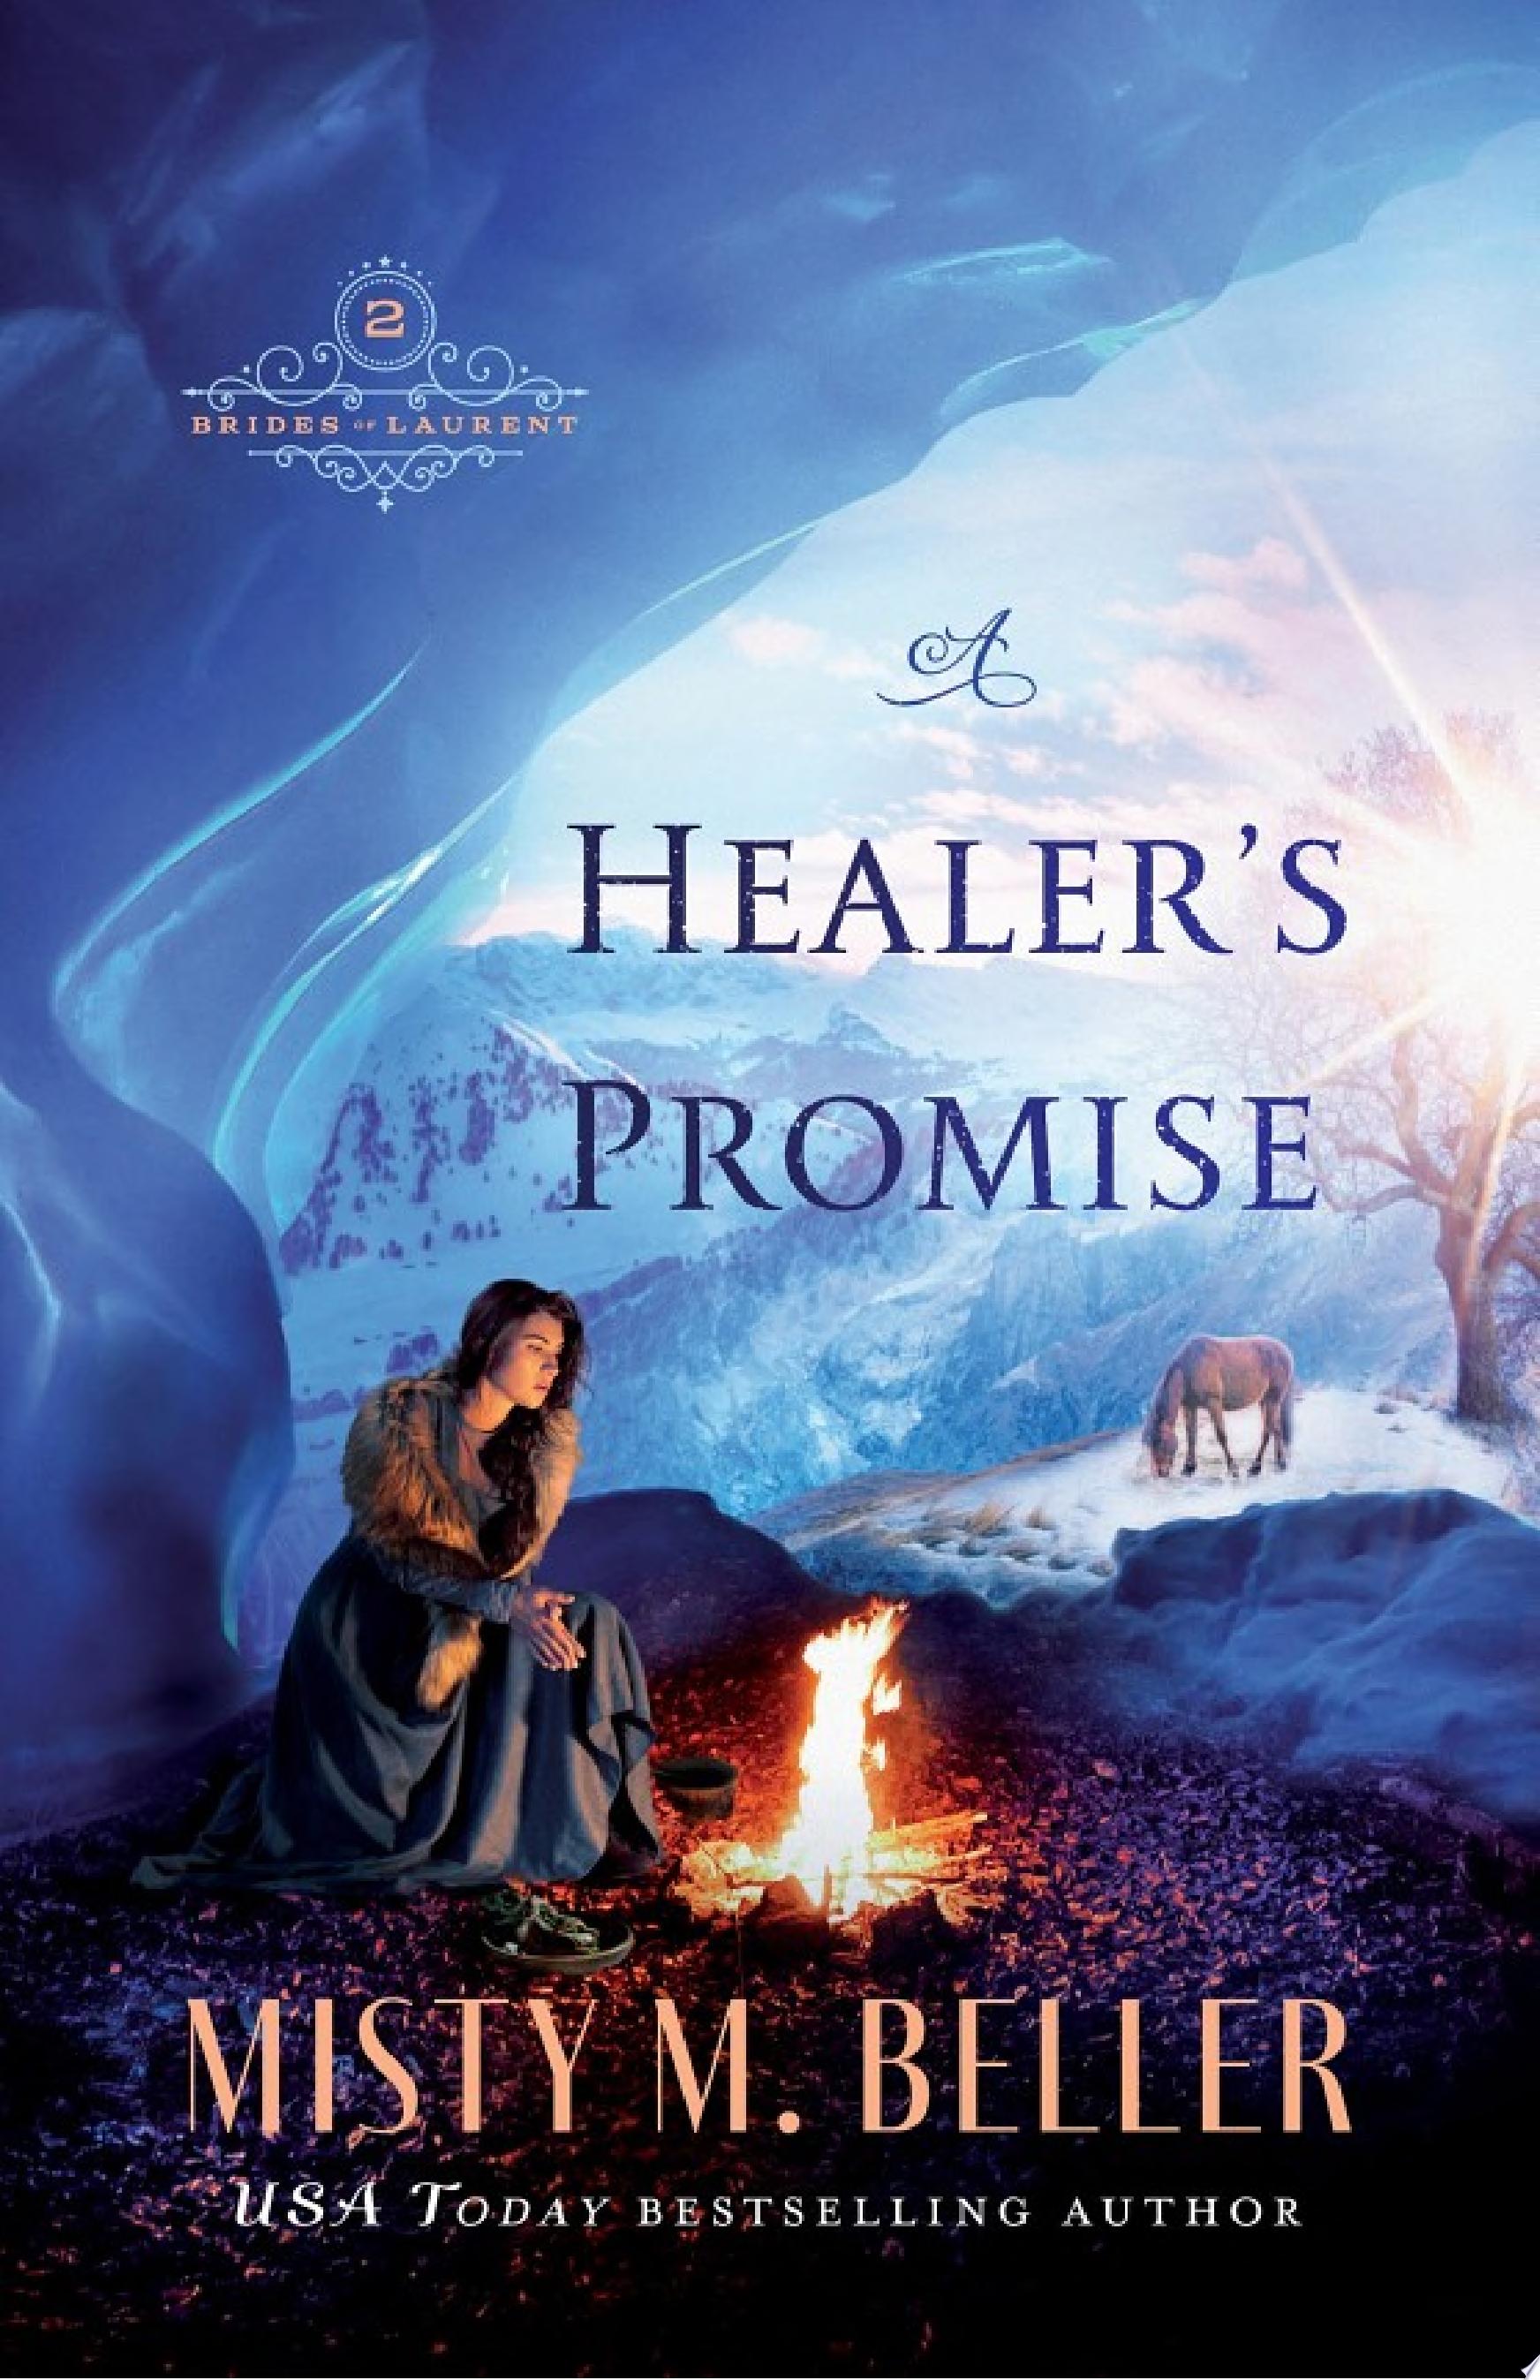 Image for "A Healer's Promise"